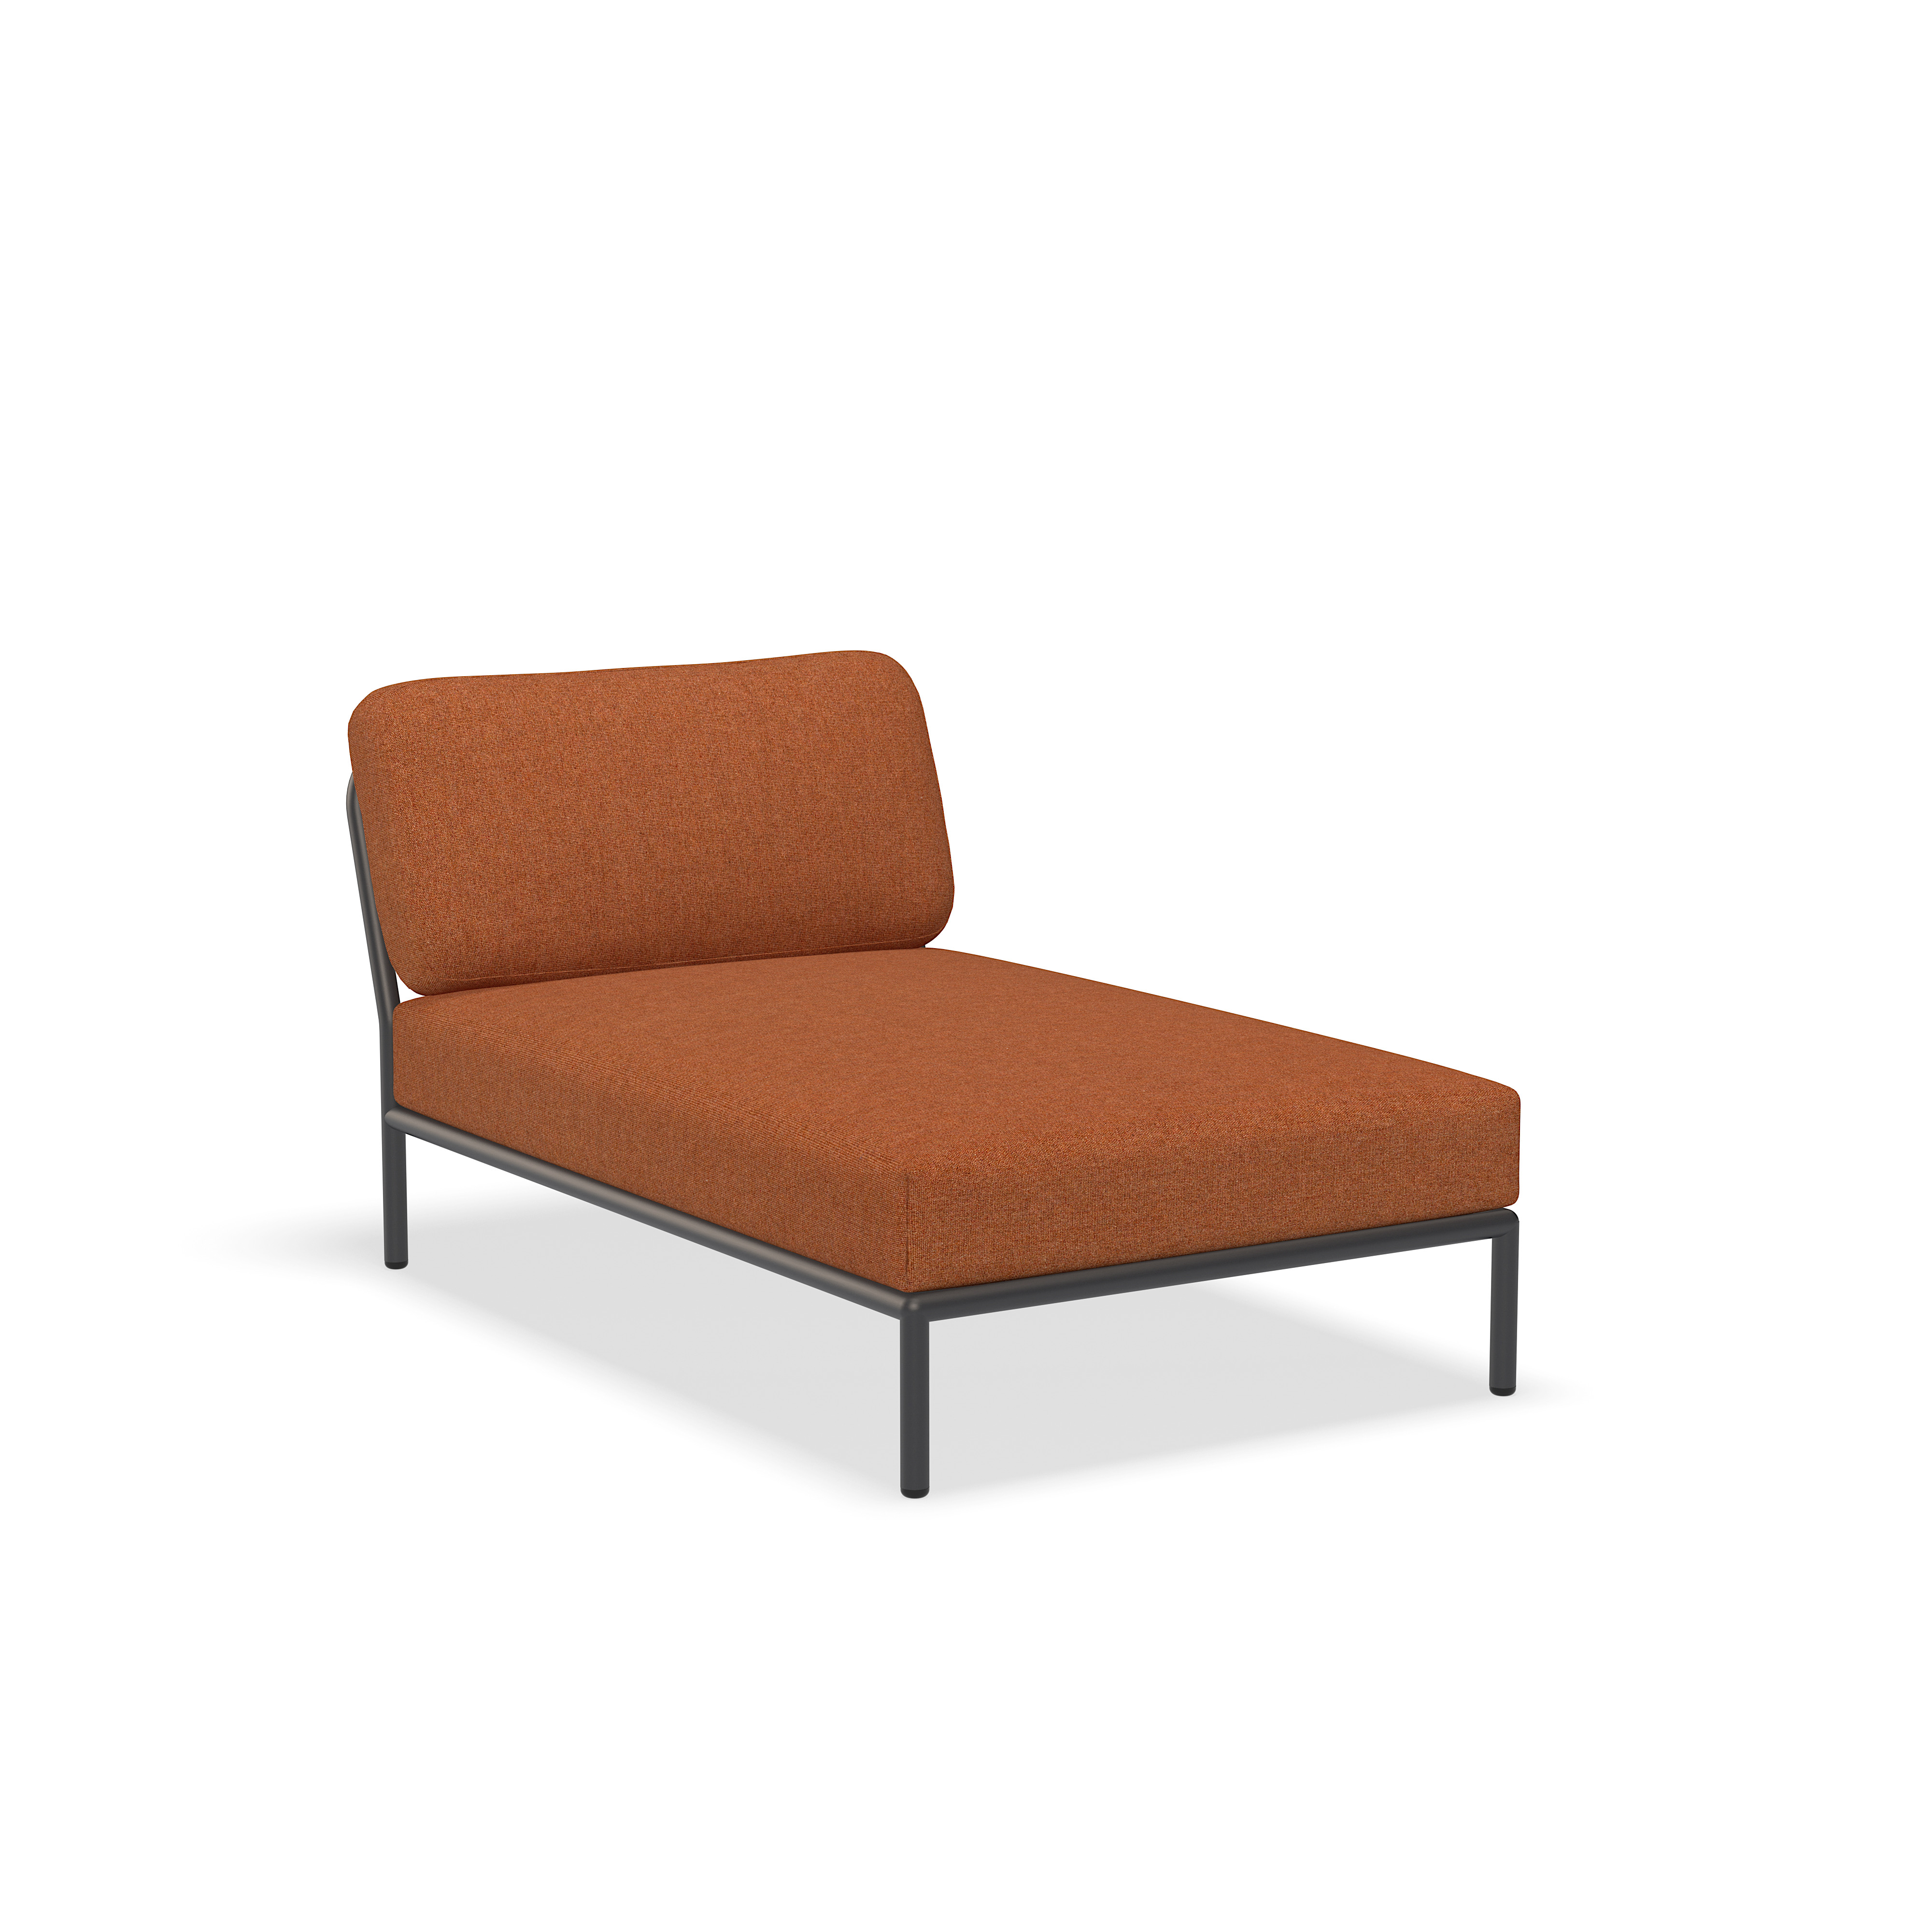 Chaise lounge  - 12209-1751 - Chaise longue, Rouille (HERITAGE), structure...